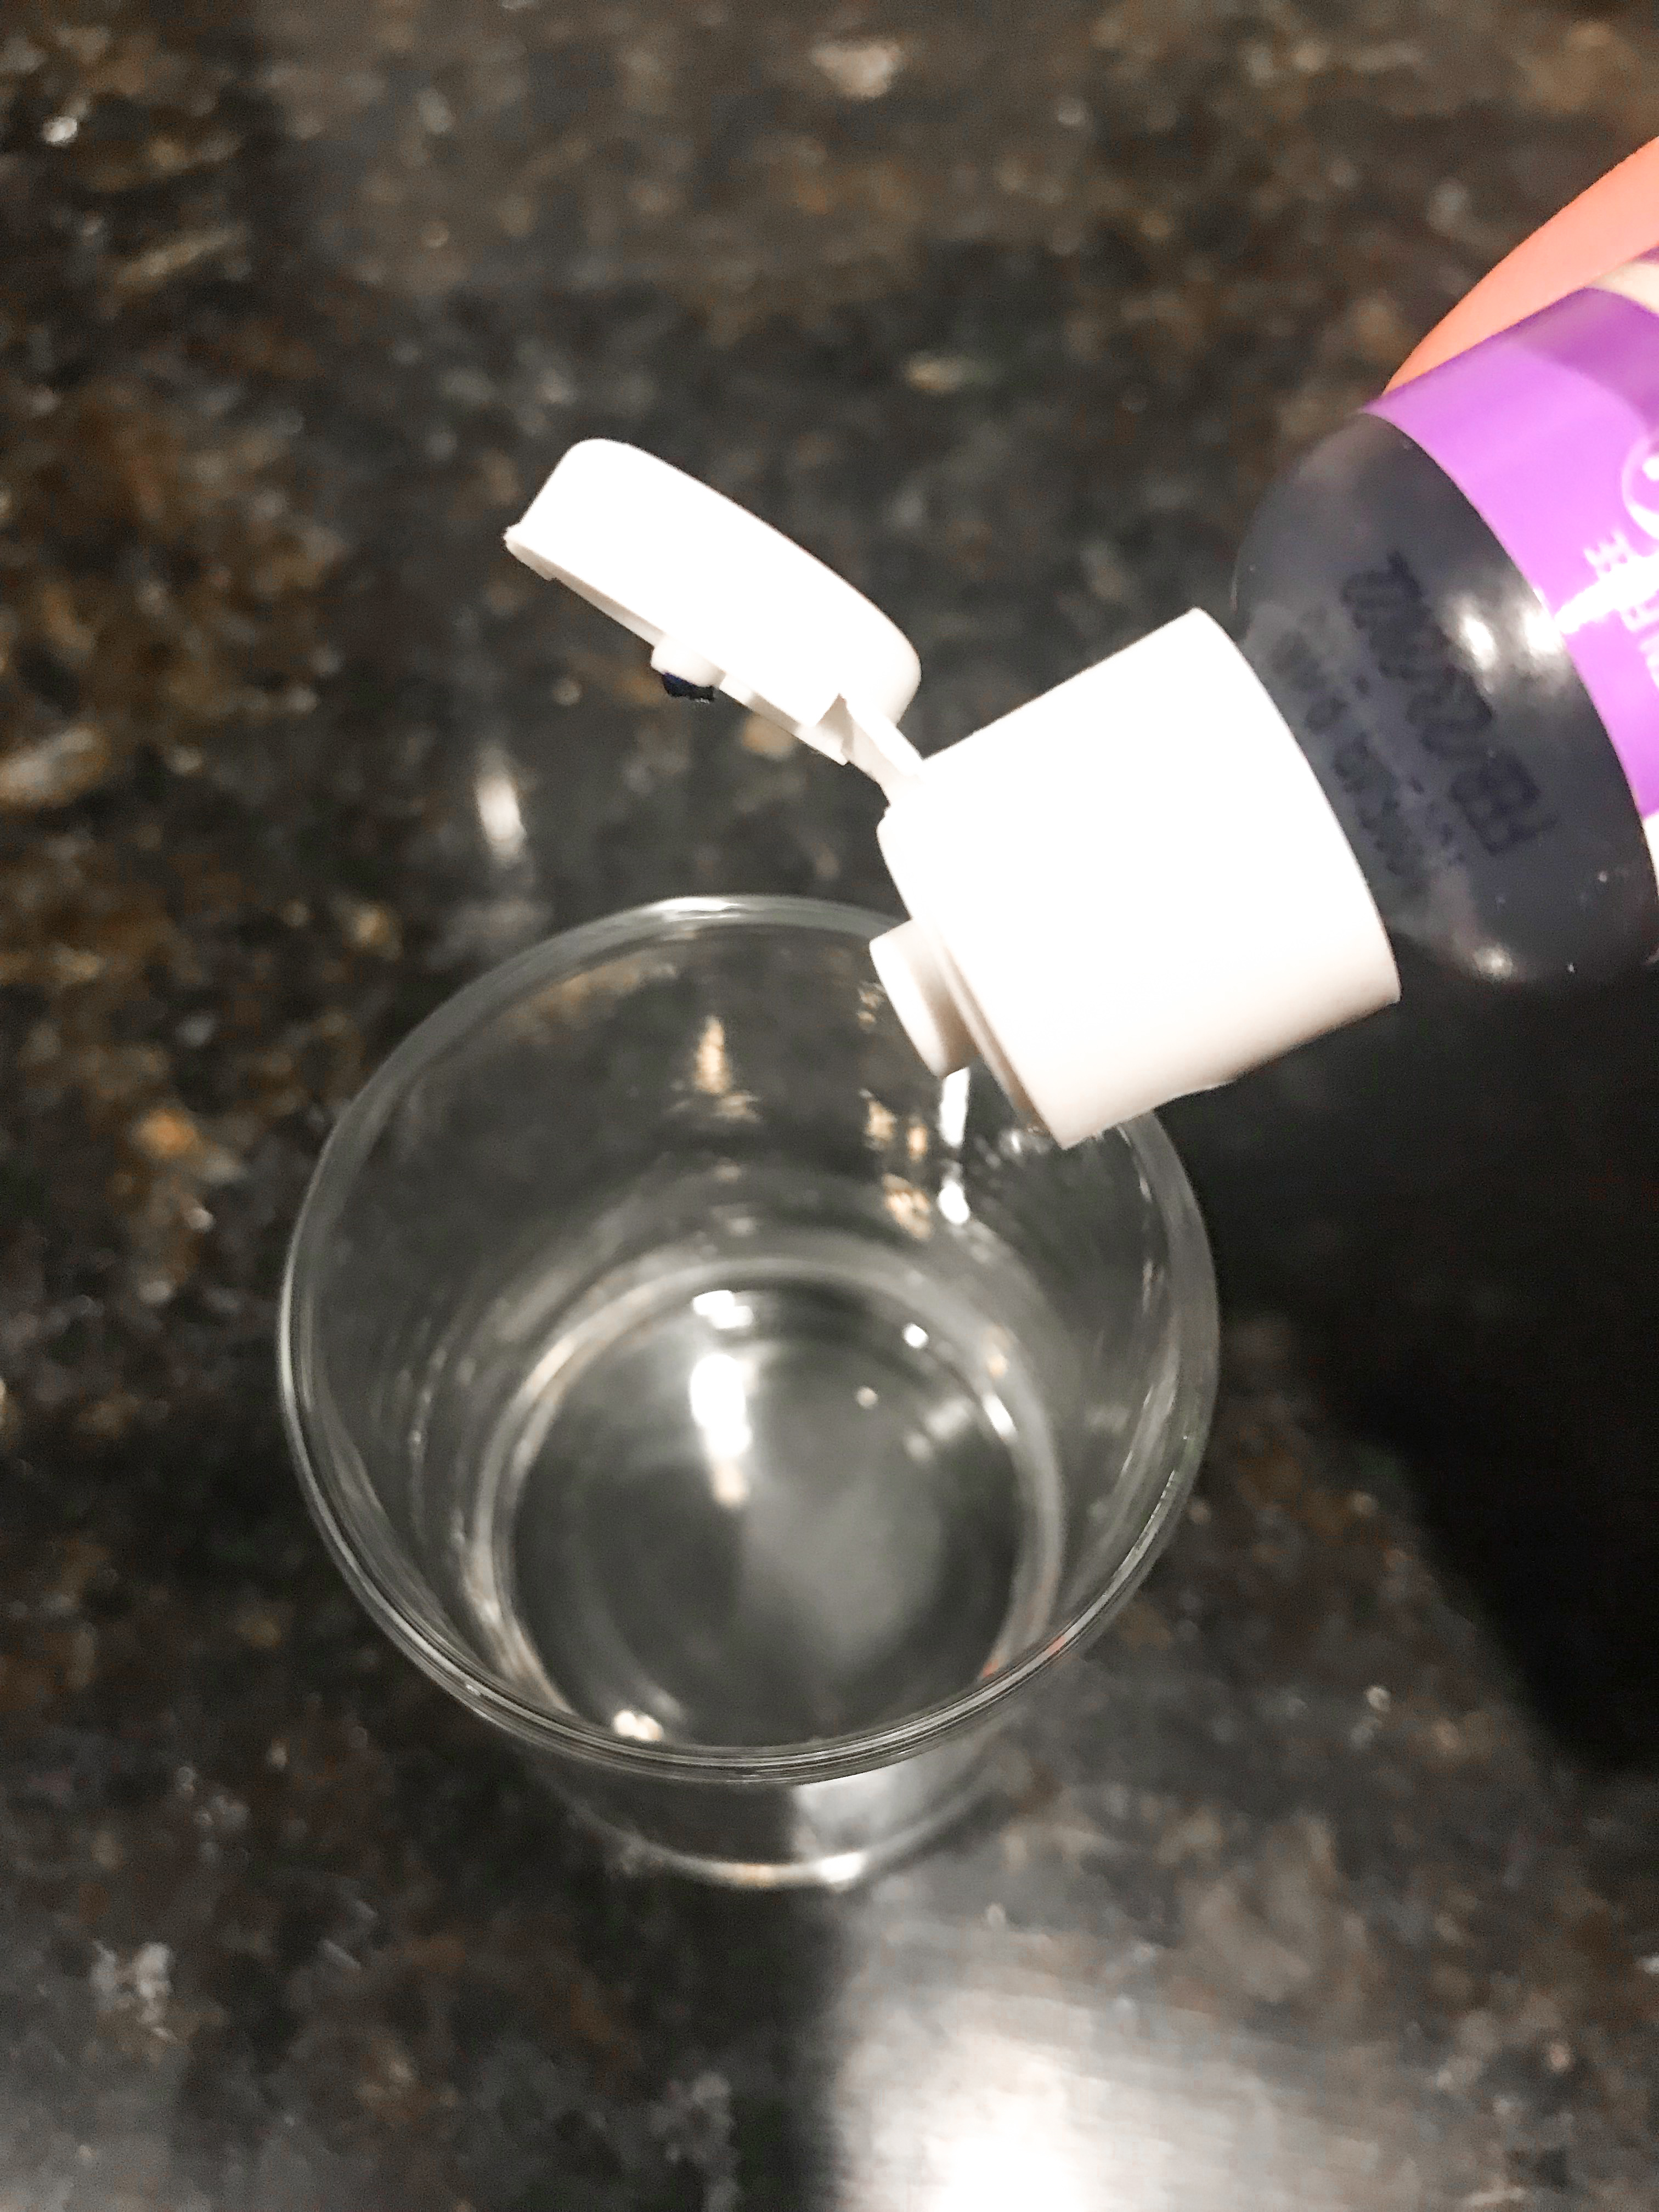 Dripping purple food coloring into vodka in a shot glass. 